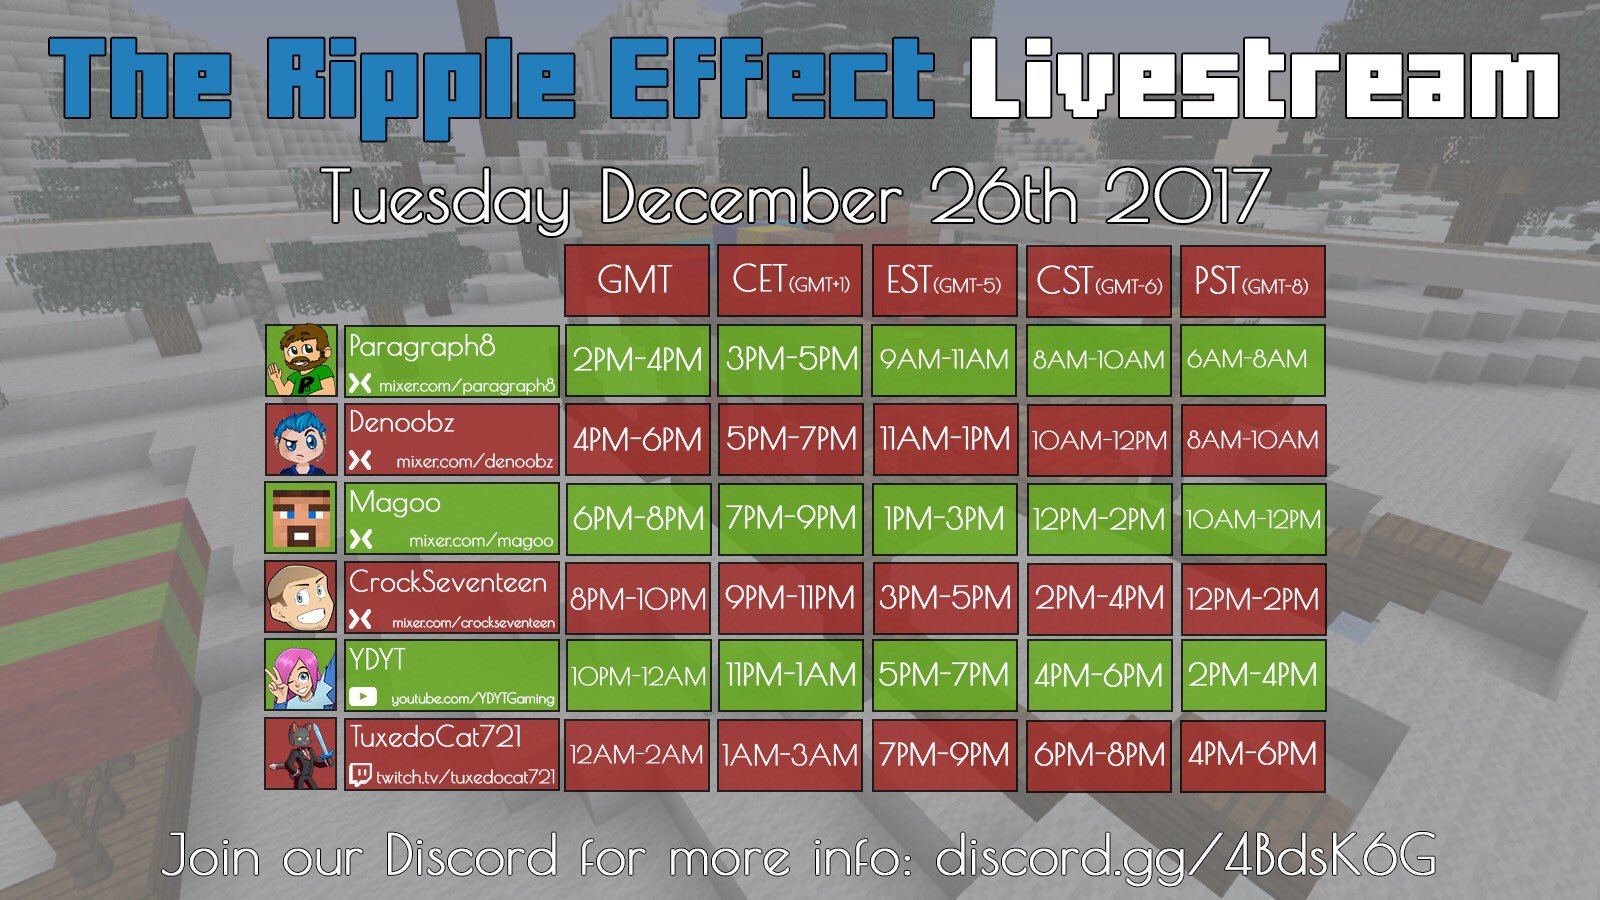 The Ripple Effect Livestream Day, Tuesday 26th December 2017